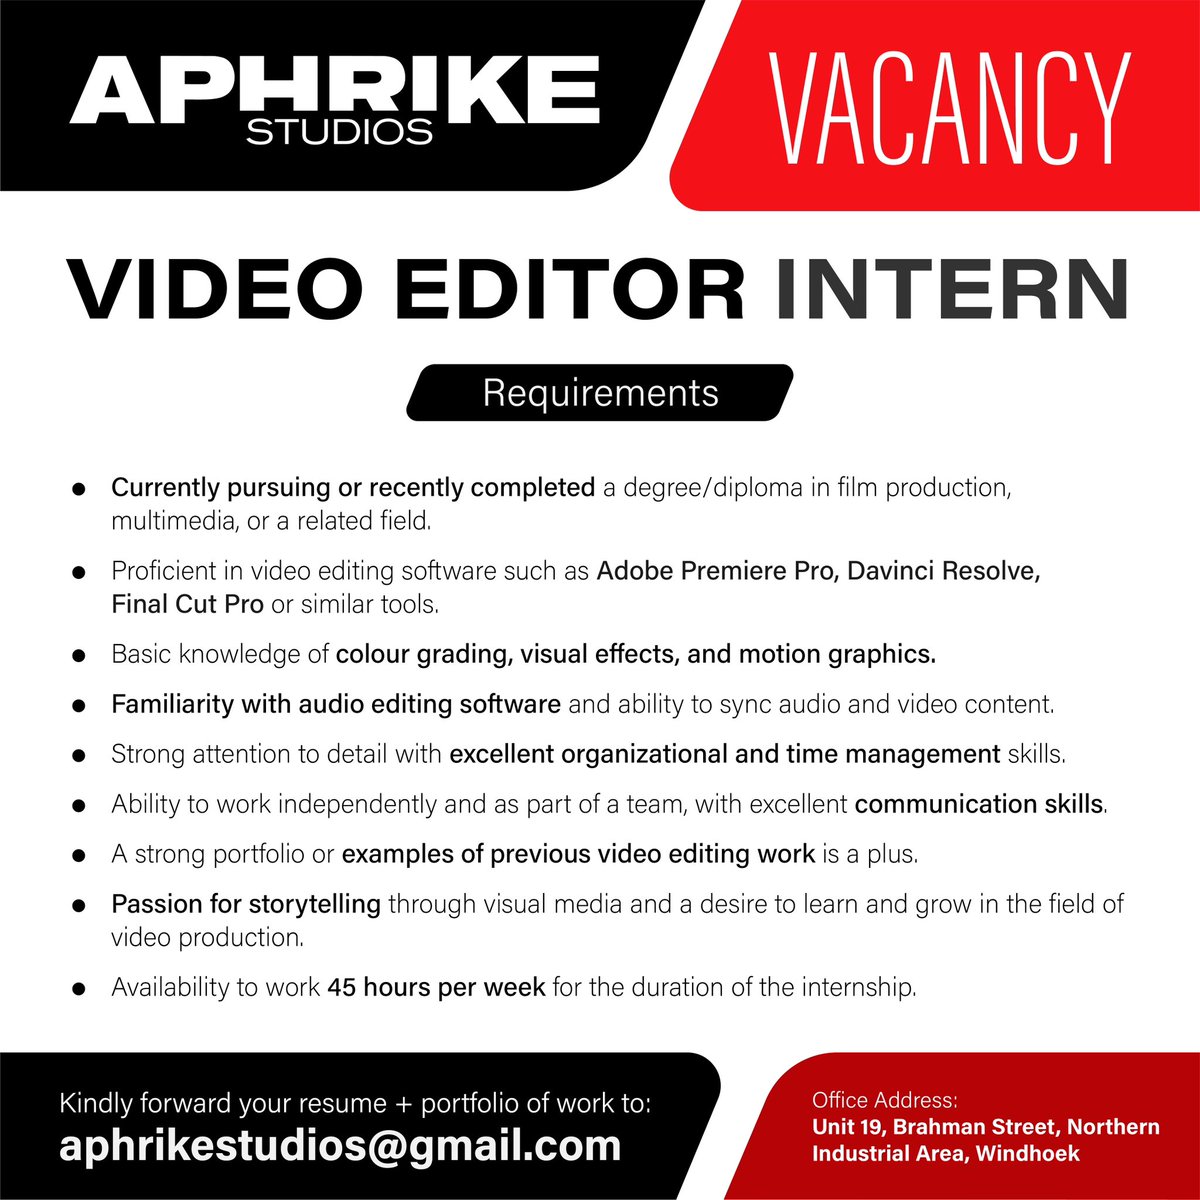 VACANCY - Video Editing Intern! 🎥 Are you a video editor with experience and knowledge of software programs such as After Effects, Davinci & Final Cut? Contact Us Today! @AphrikeStudios